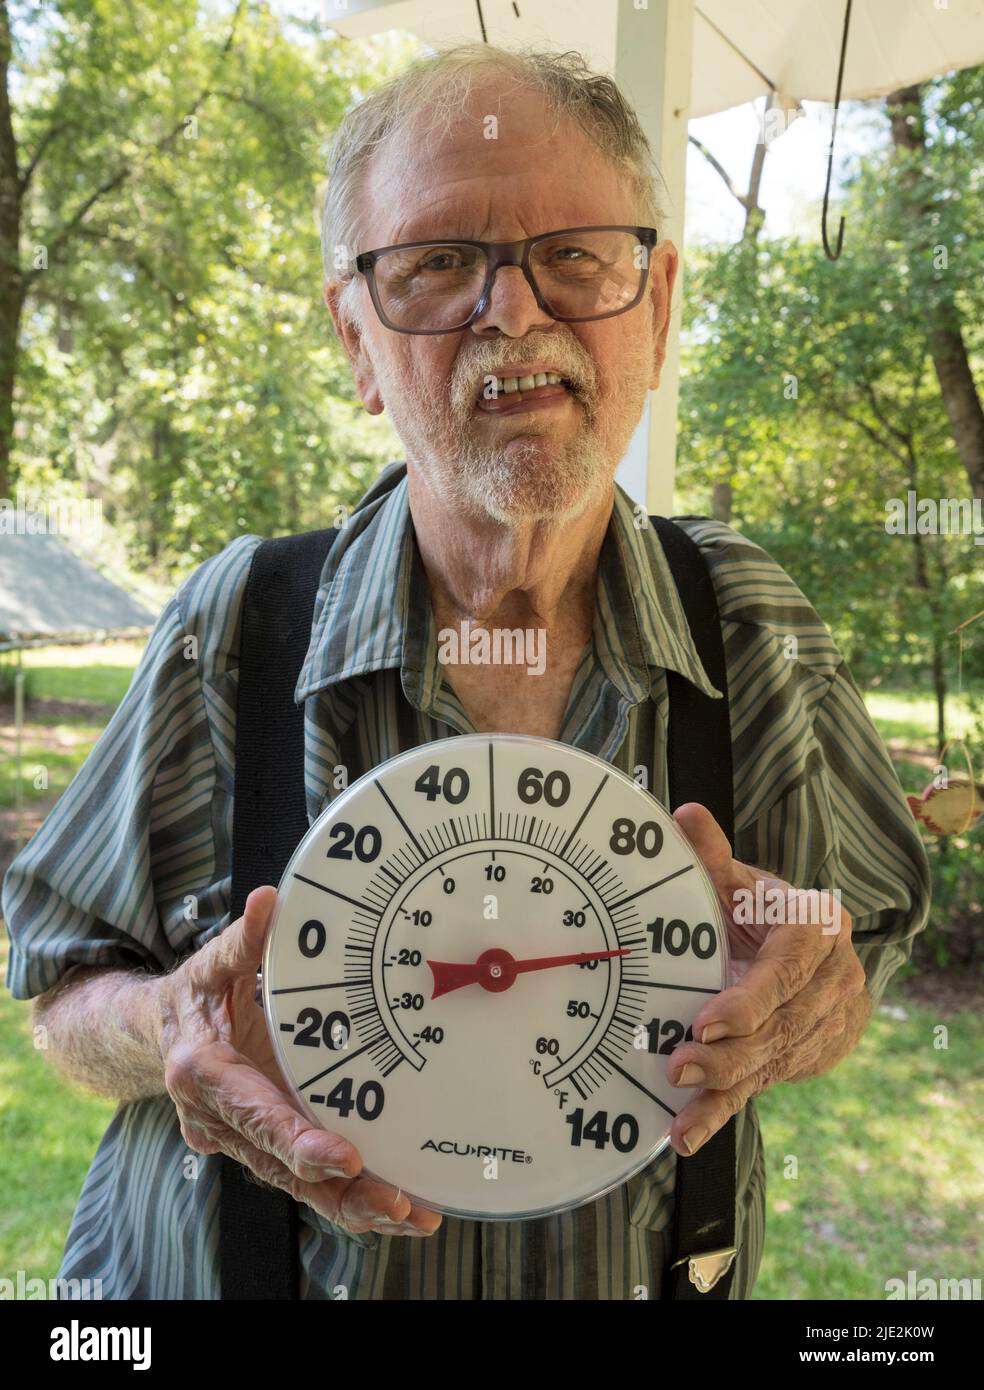 Over 100 degree day in North Central Florida during record breaking heat wave... Stock Photo